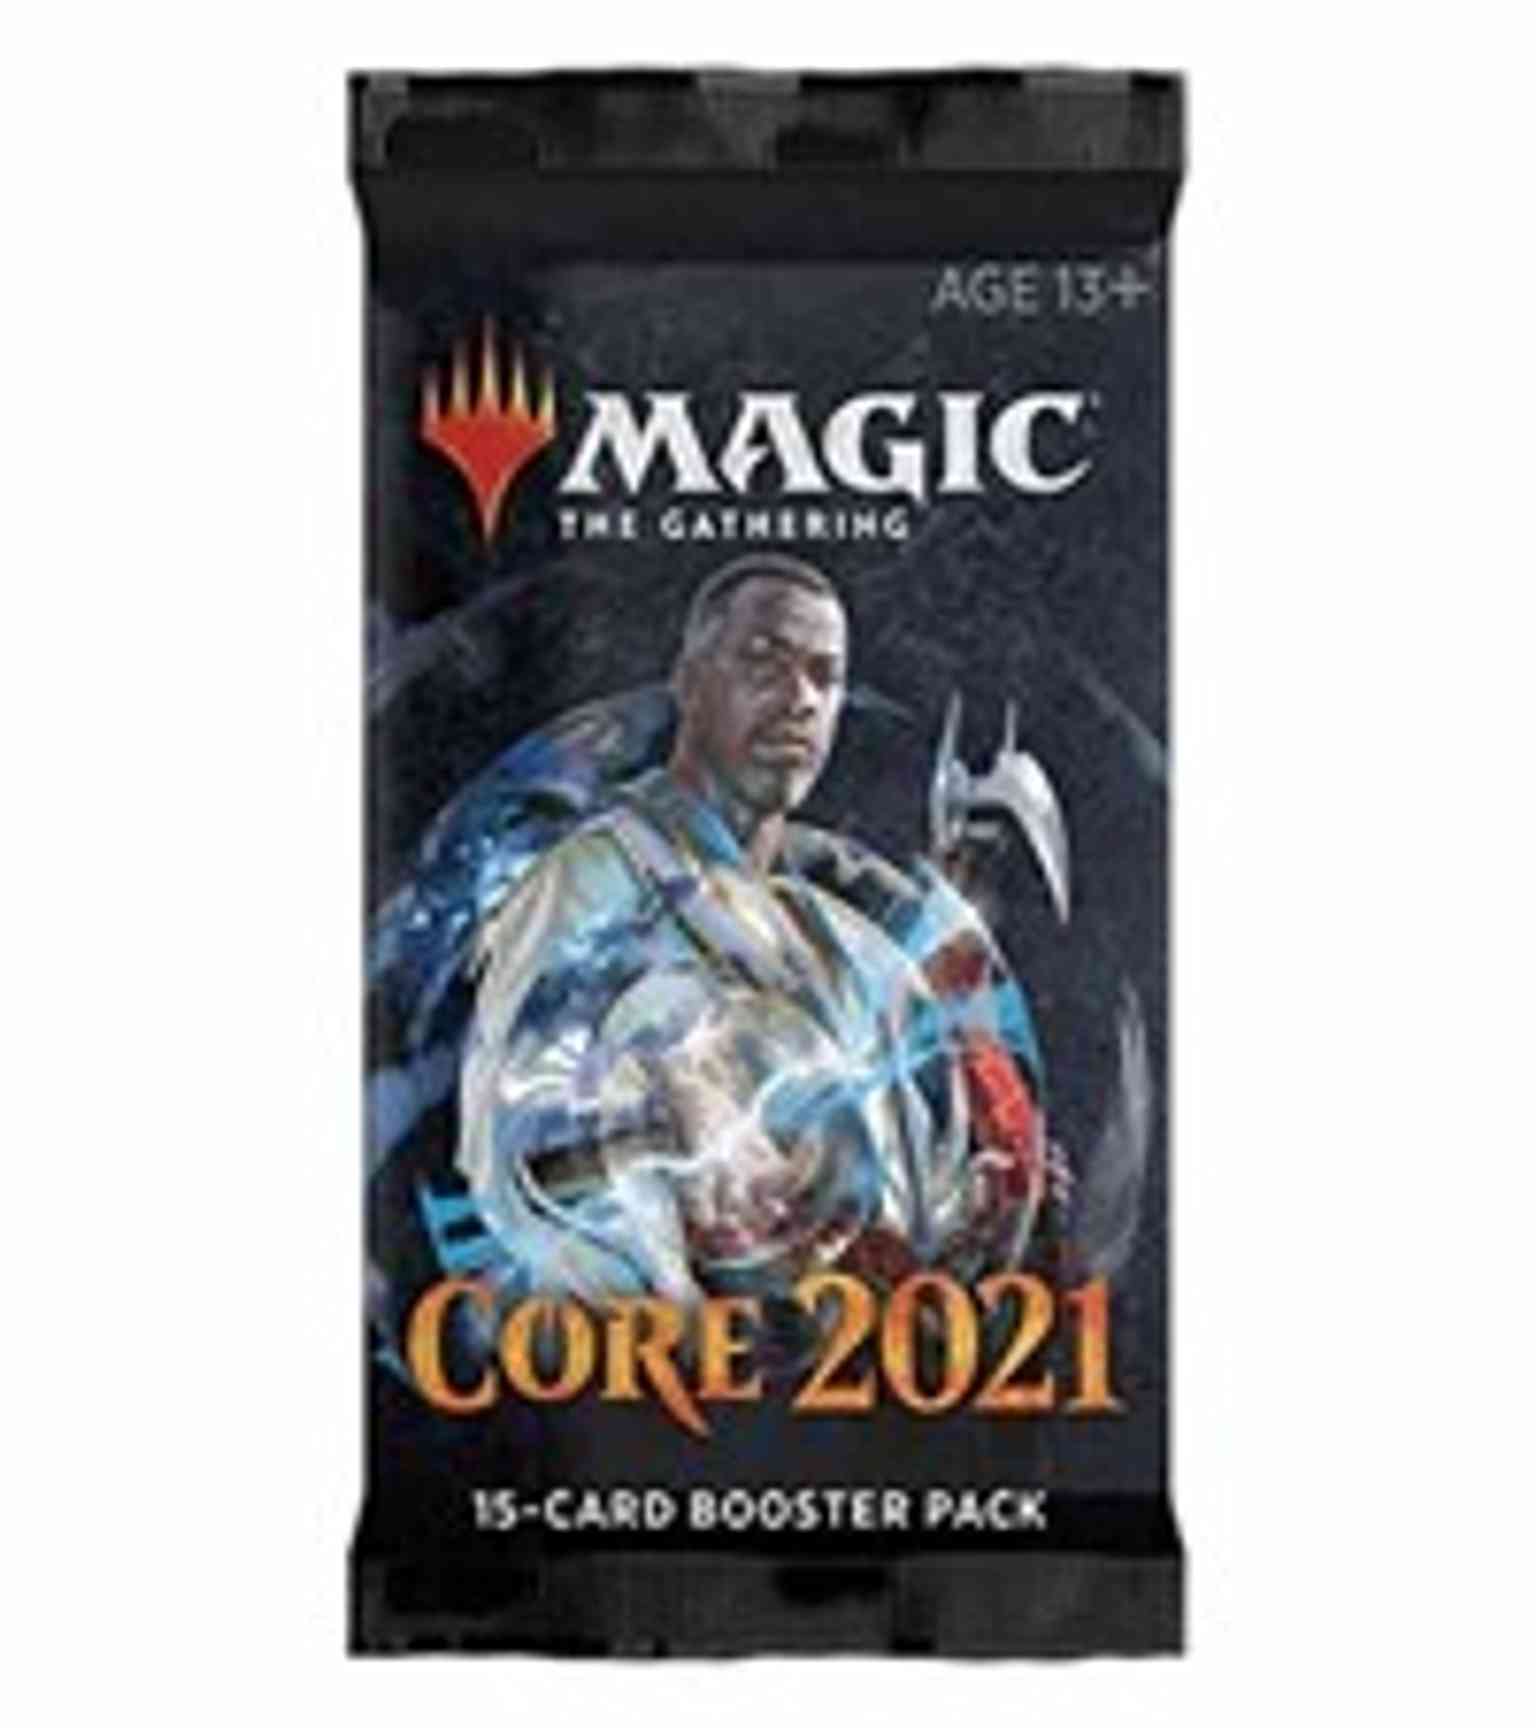 Core Set 2021 - Booster Pack magic card front